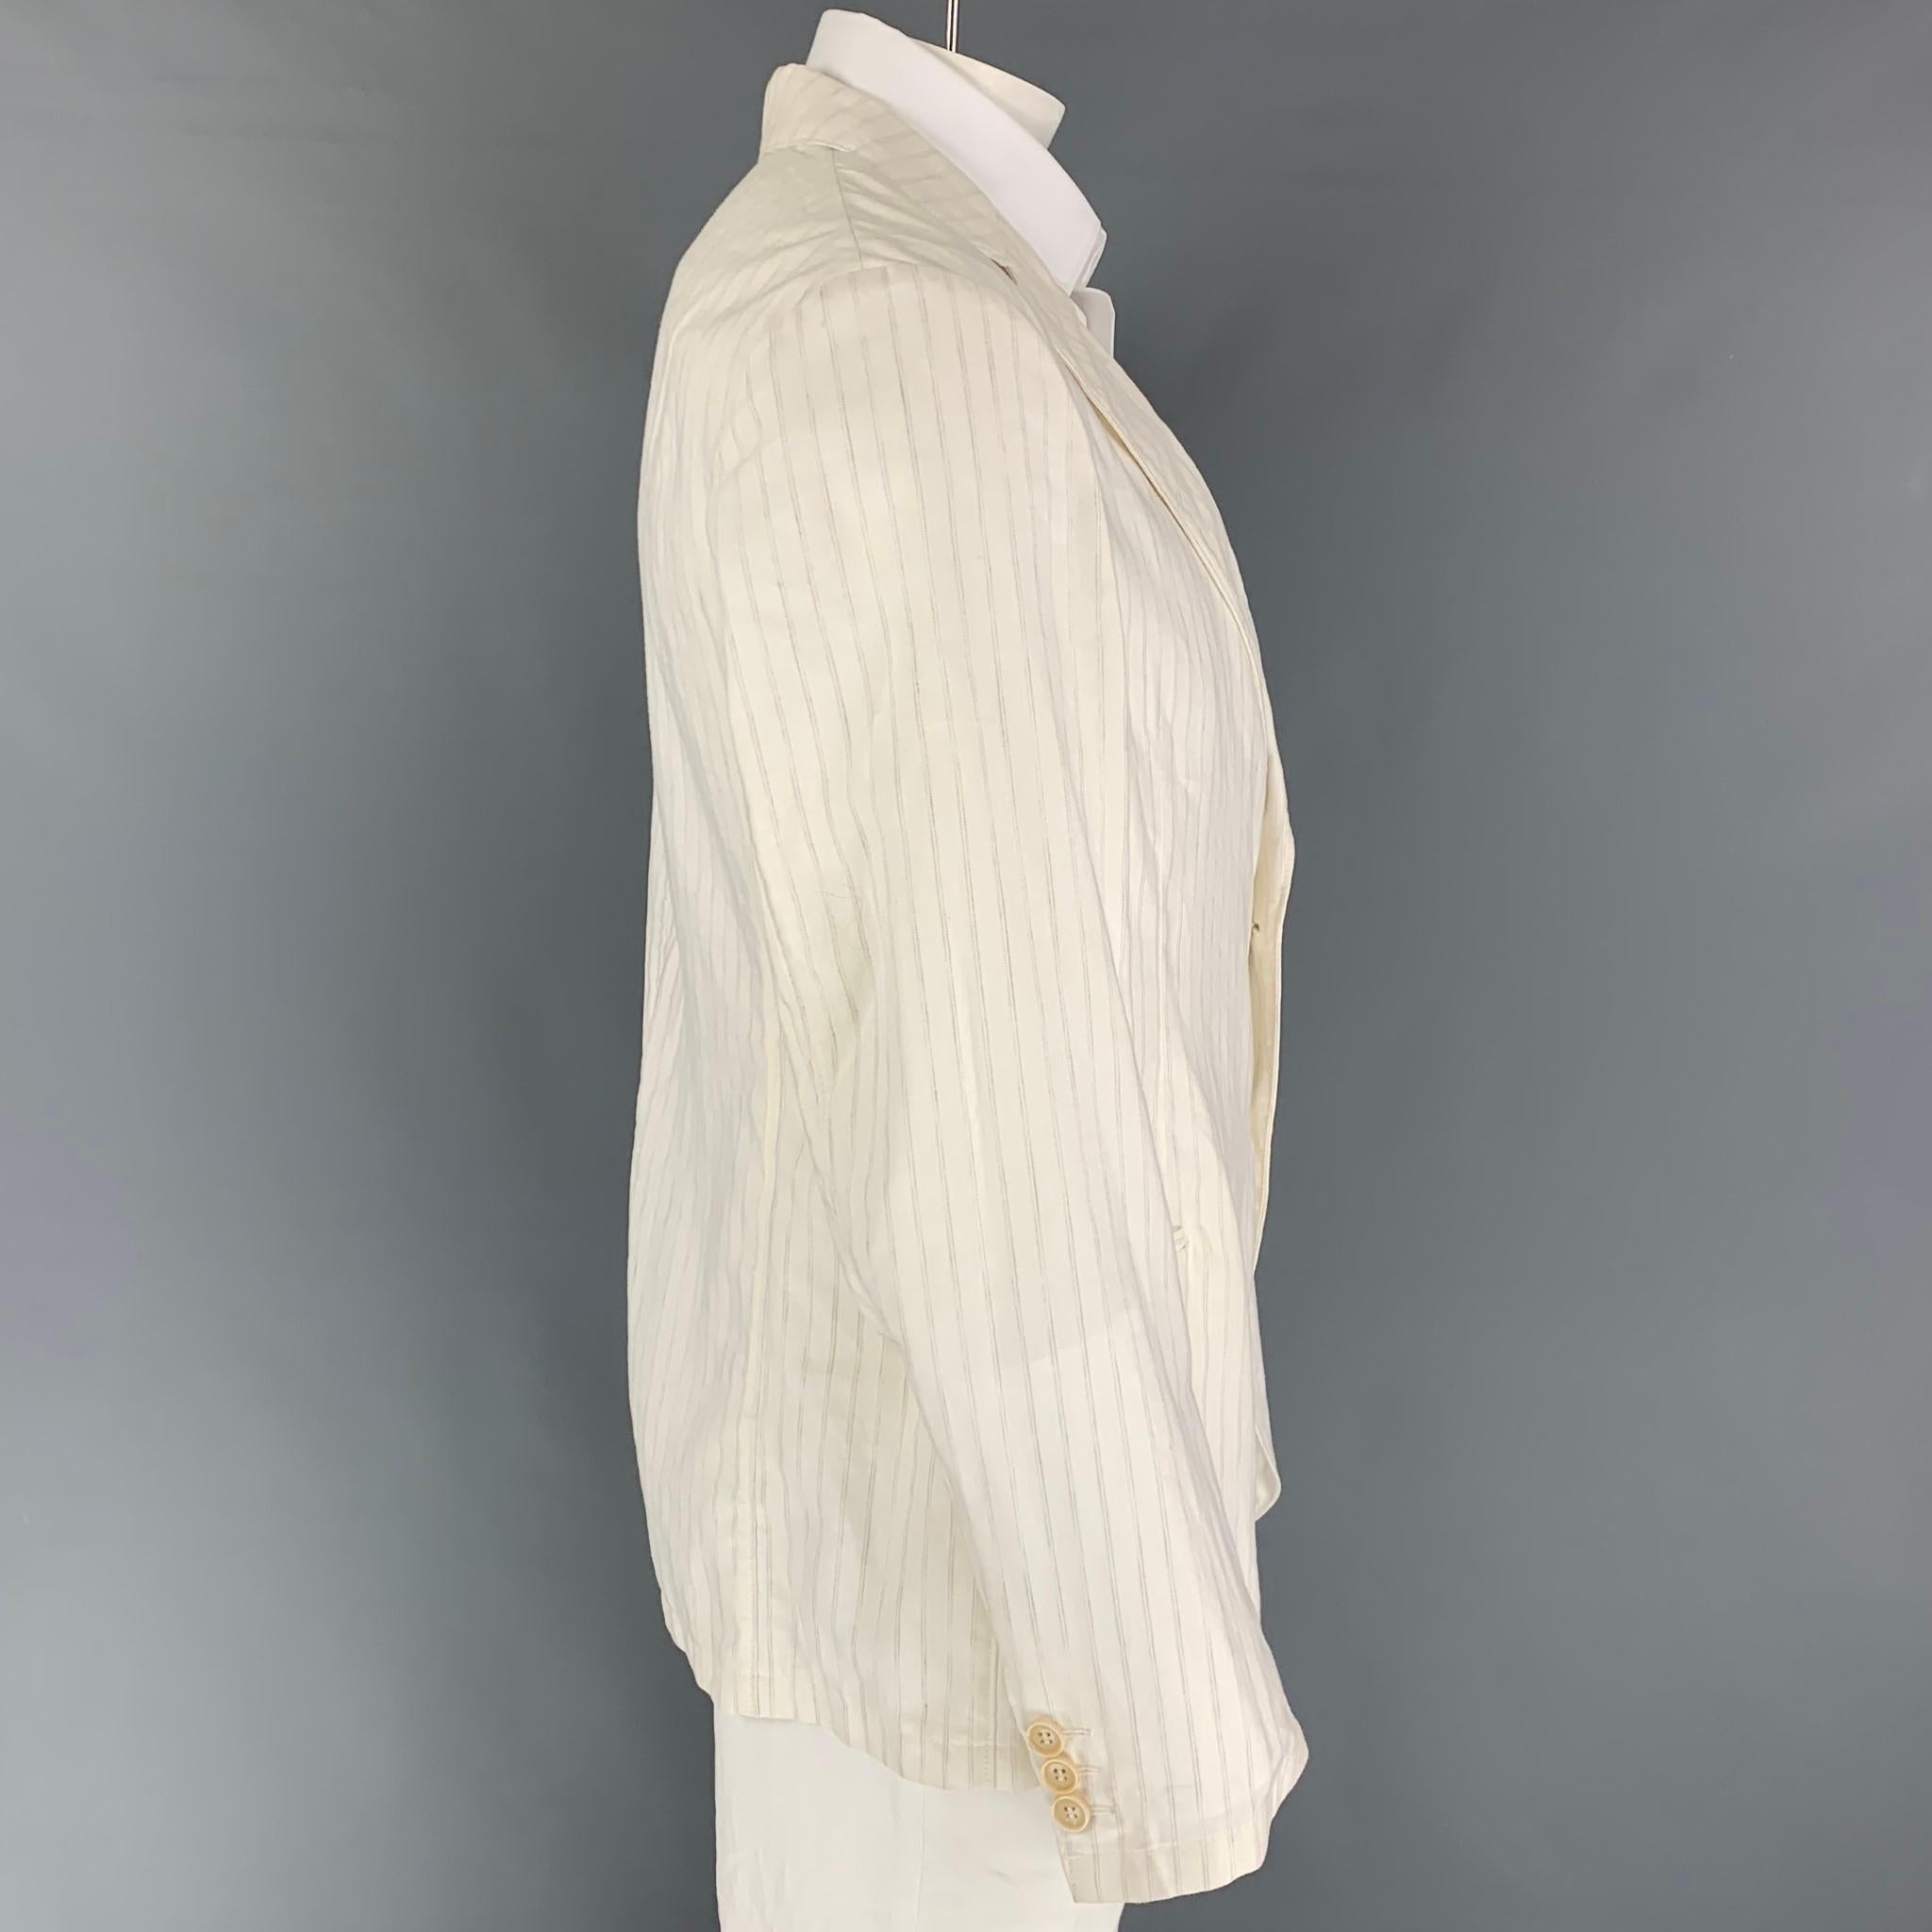 ARMANI COLLEZIONI sport coat comes in a off white stripe cotton / linen featuring a notch lapel, slit pockets, and a double button closure. 

Good Pre-Owned Condition.
Marked: 44

Measurements:

Shoulder: 18.5 in.
Chest: 44 in.
Sleeve: 27